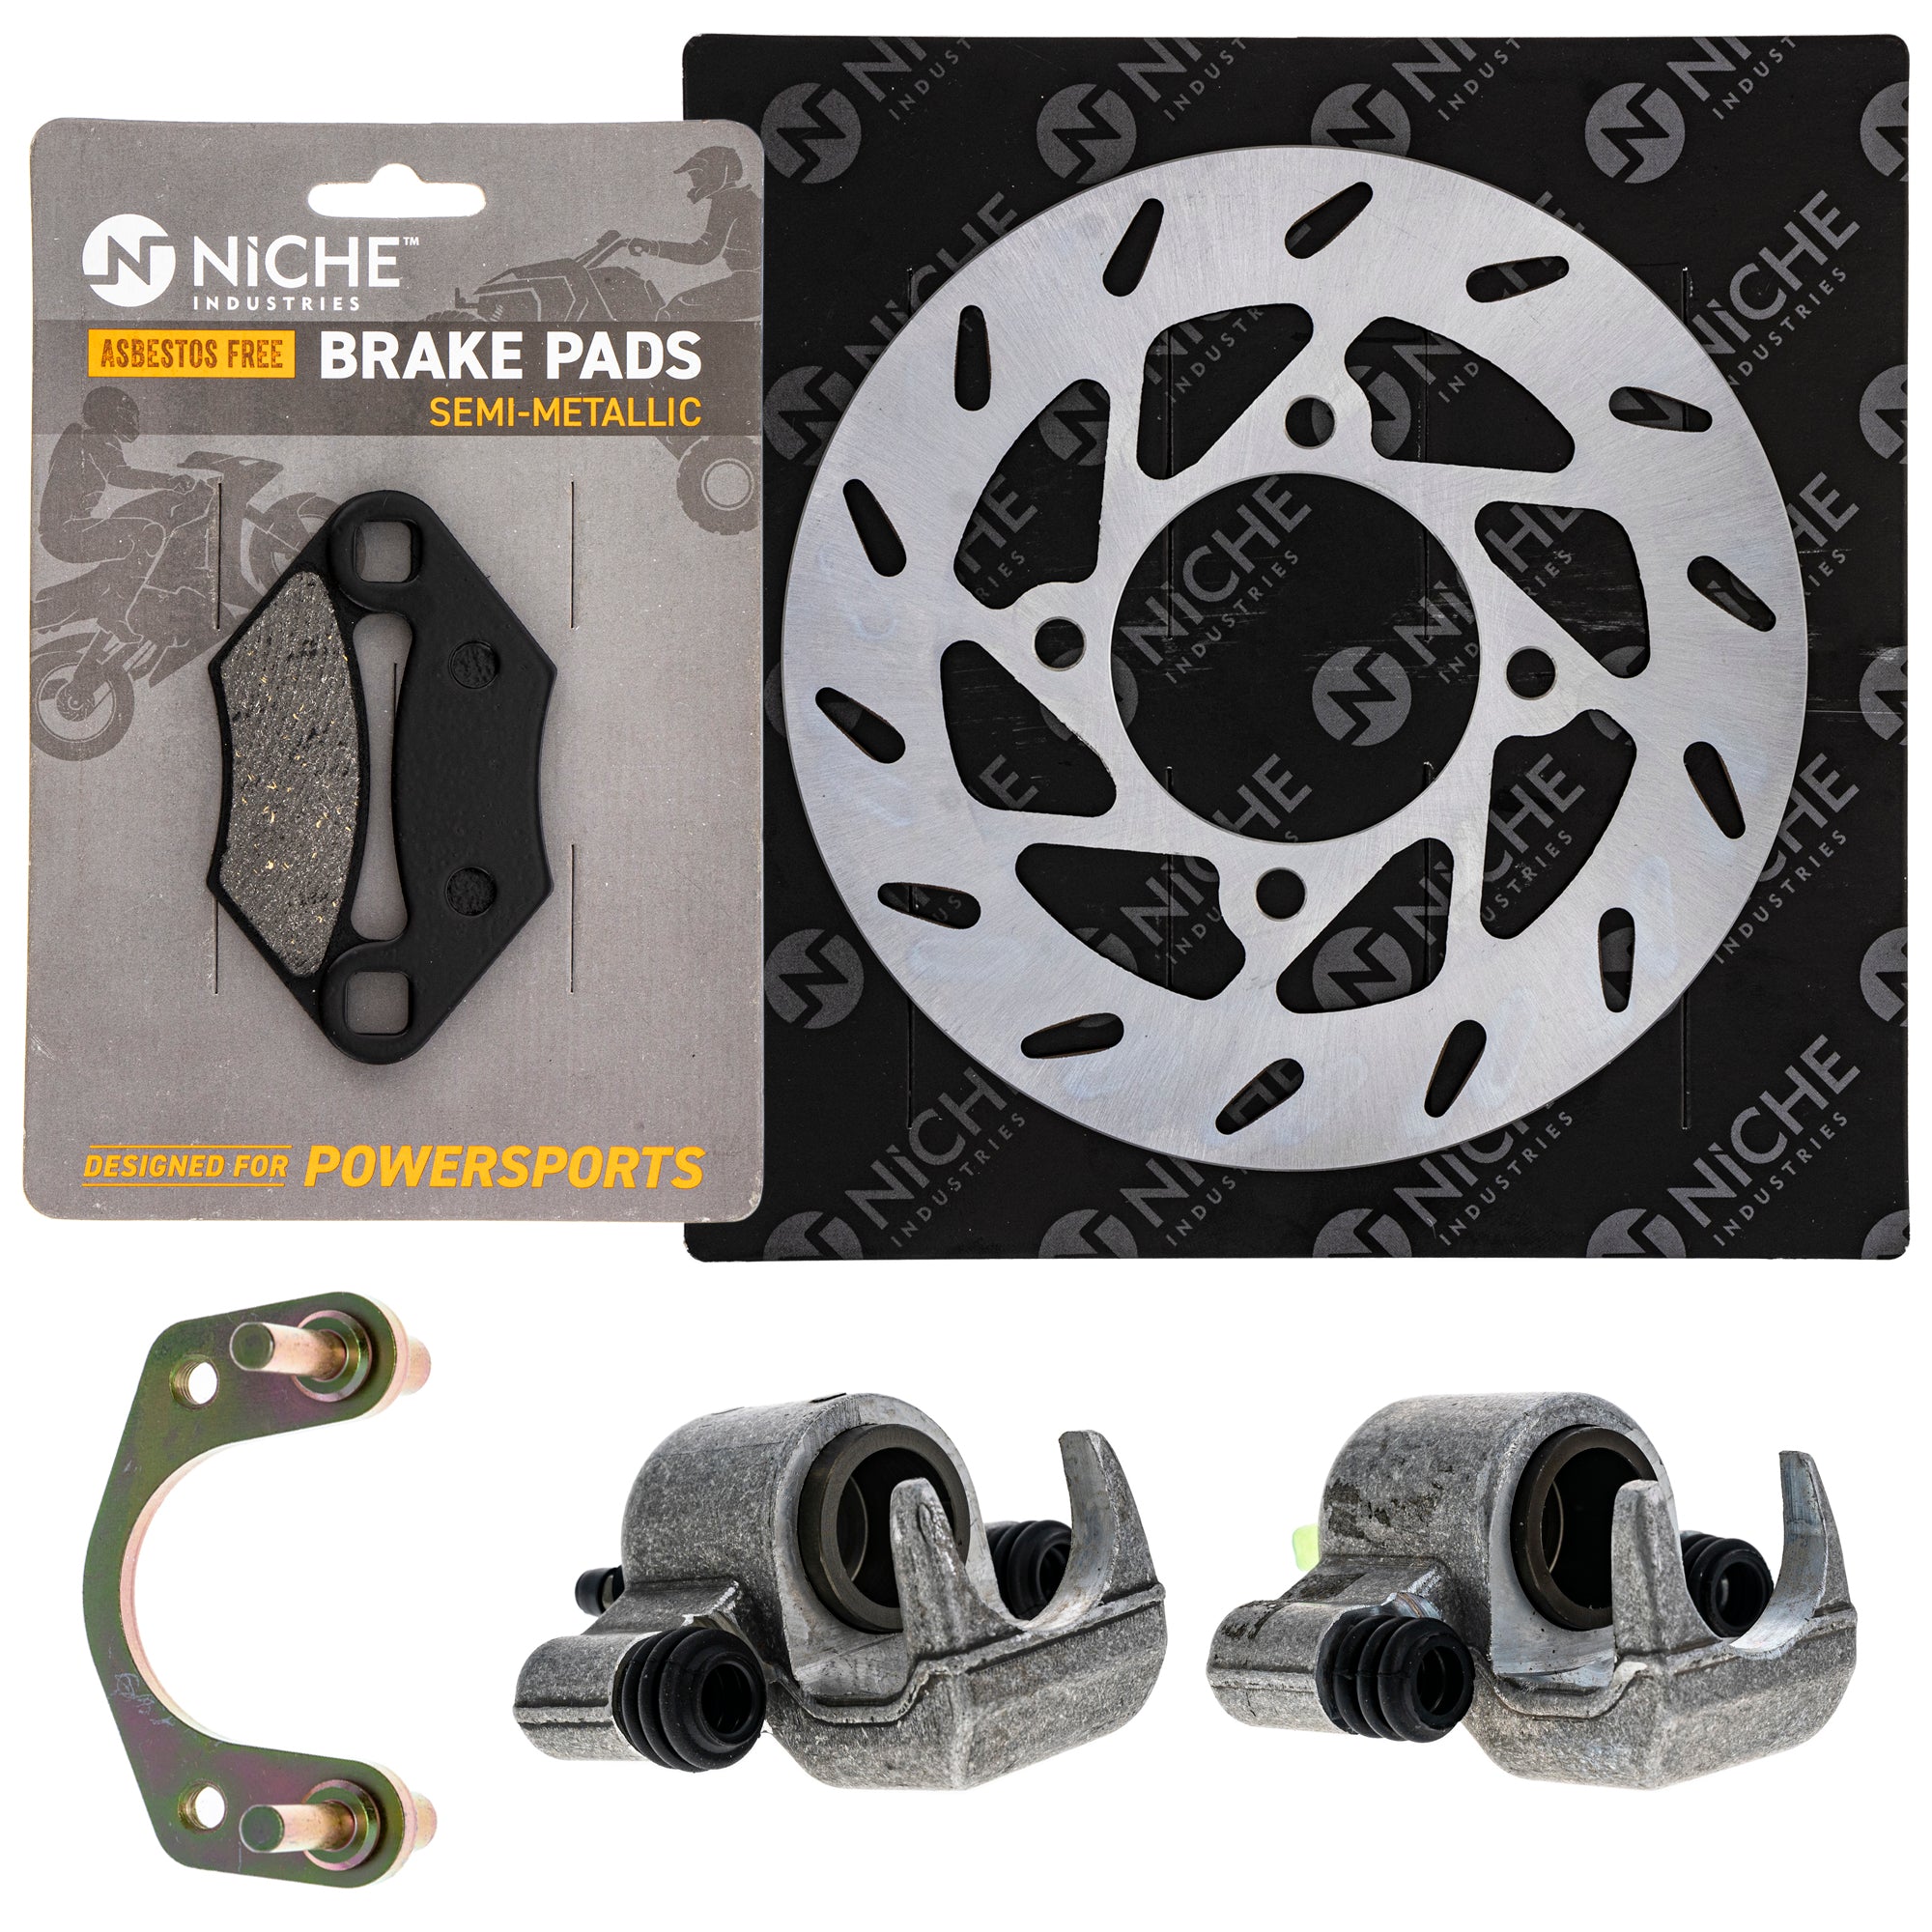 Front Brakes Rebuild Kit - Calipers, Rotors, Pads for zOTHER Polaris Outlaw NICHE MK1007975